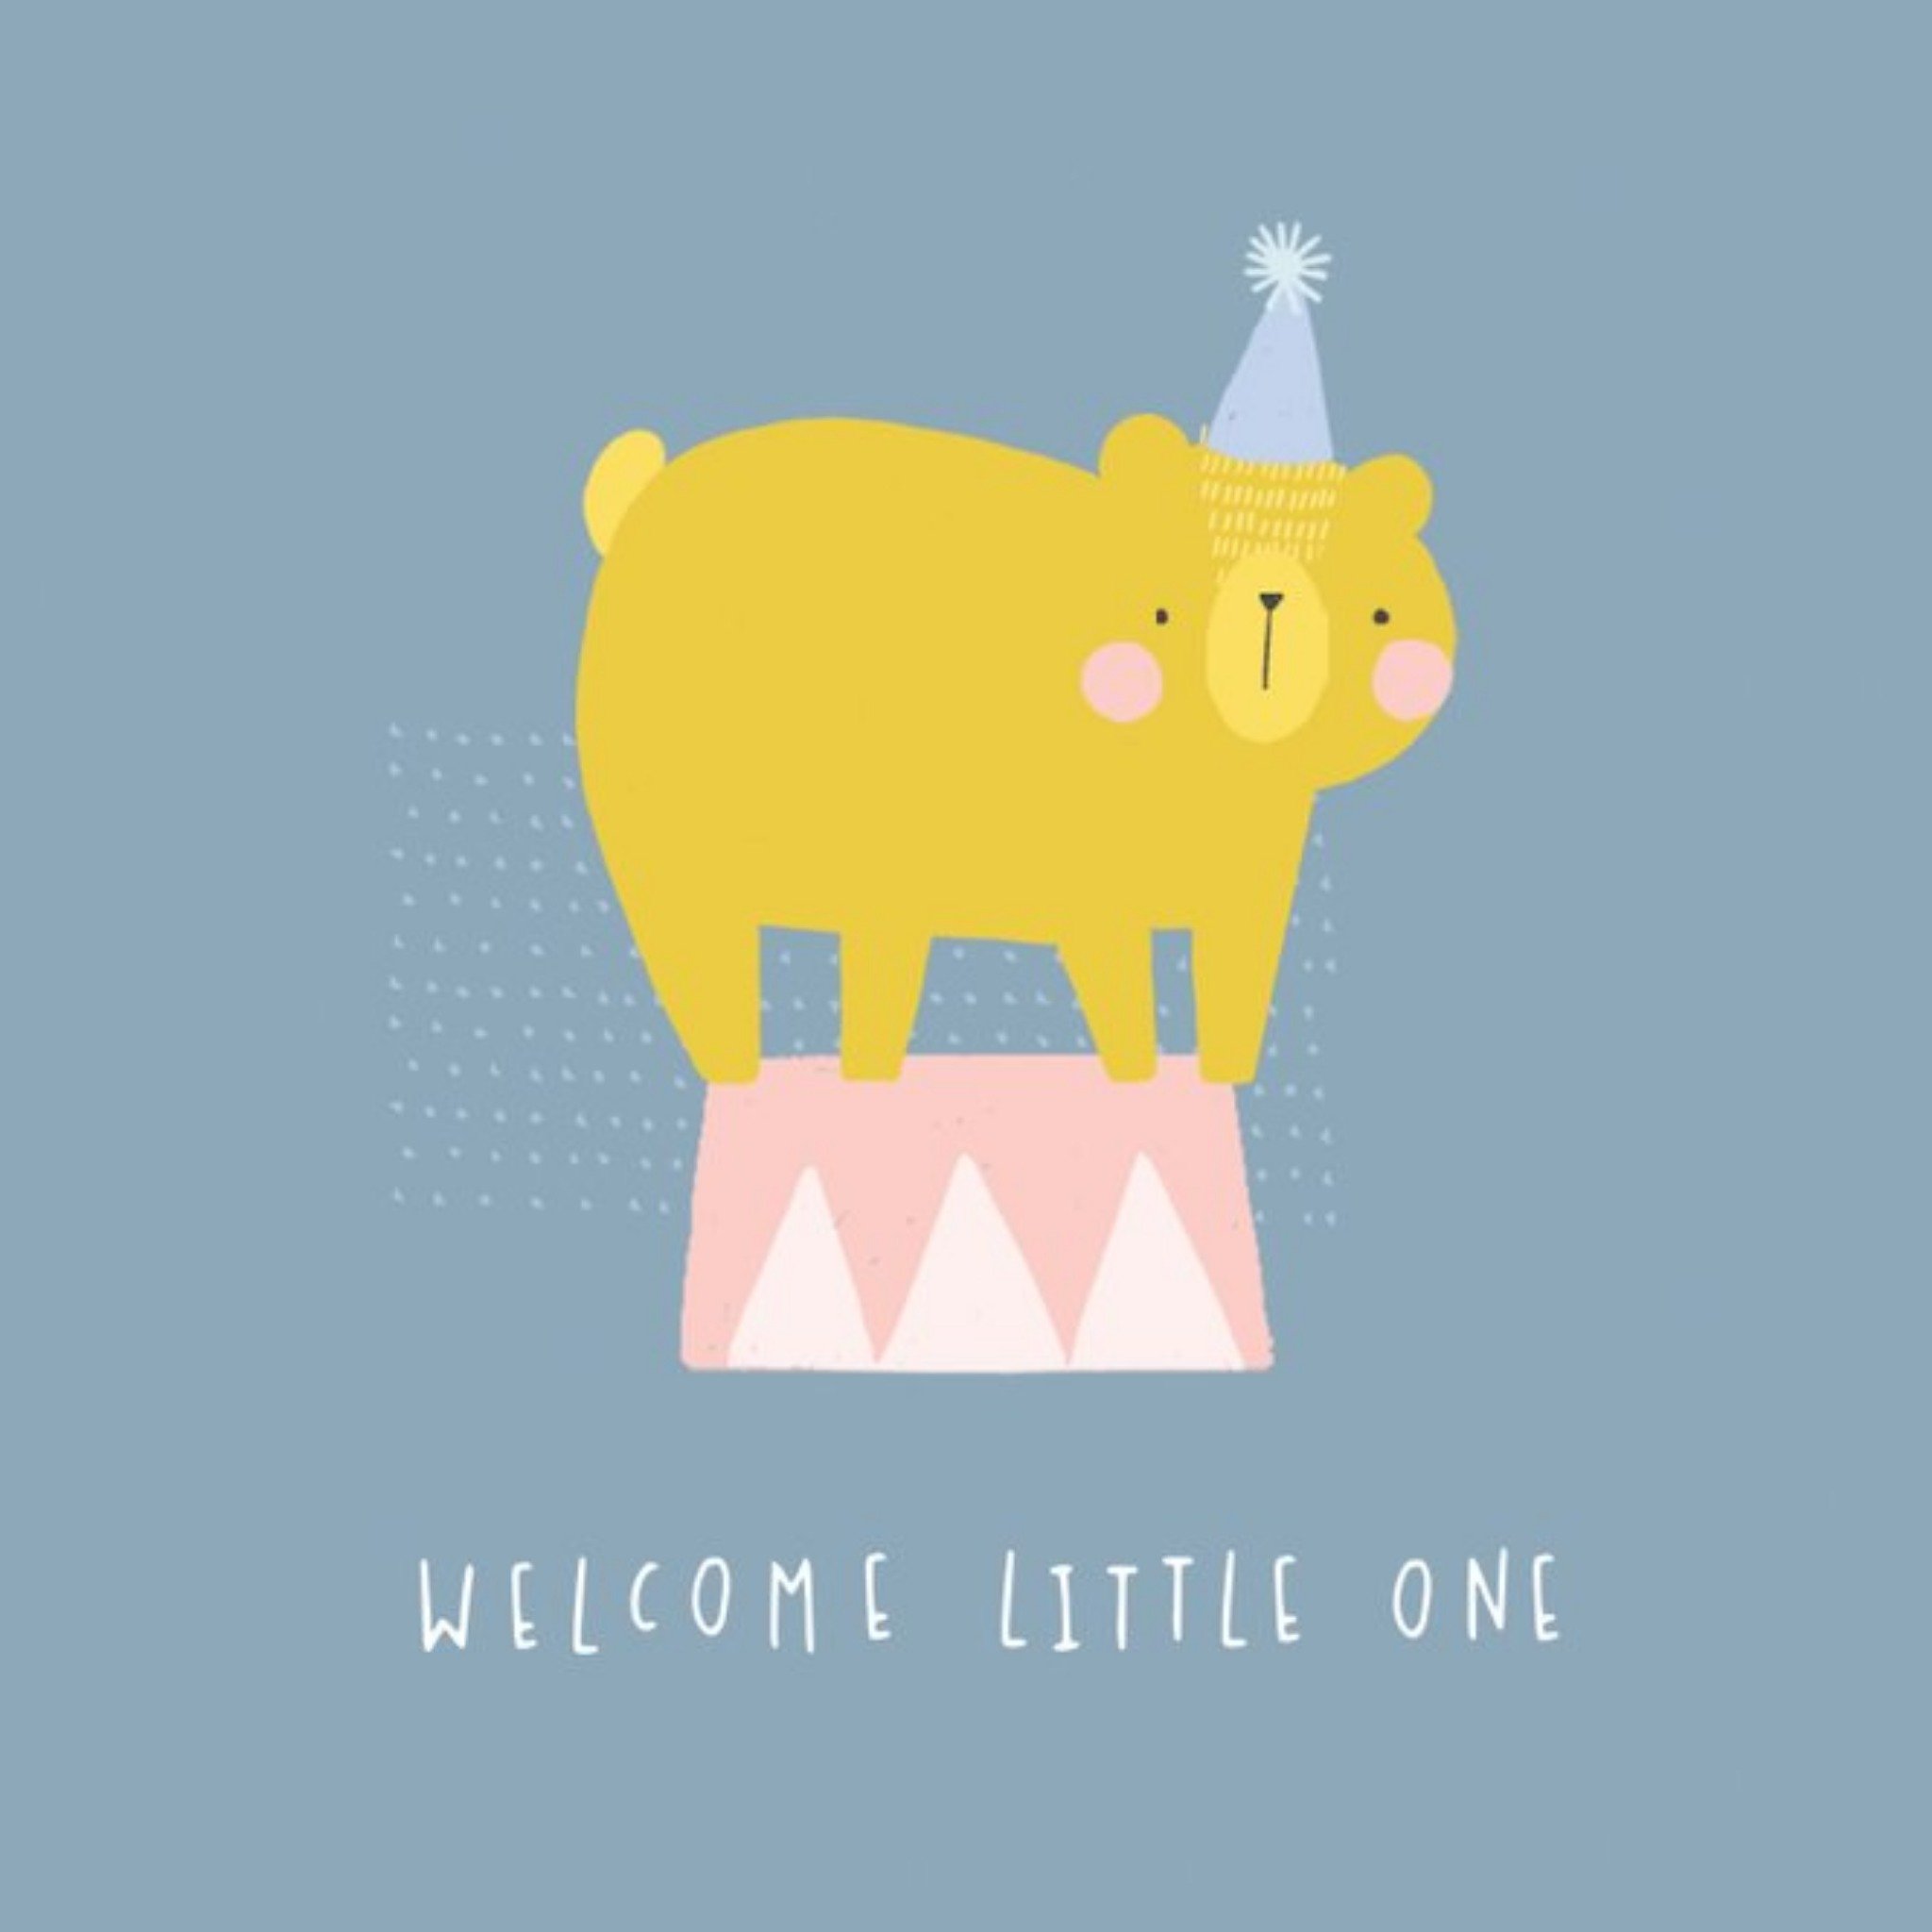 Moonpig Cute Illustration Of A Bear On A Blue Background New Baby Card, Square